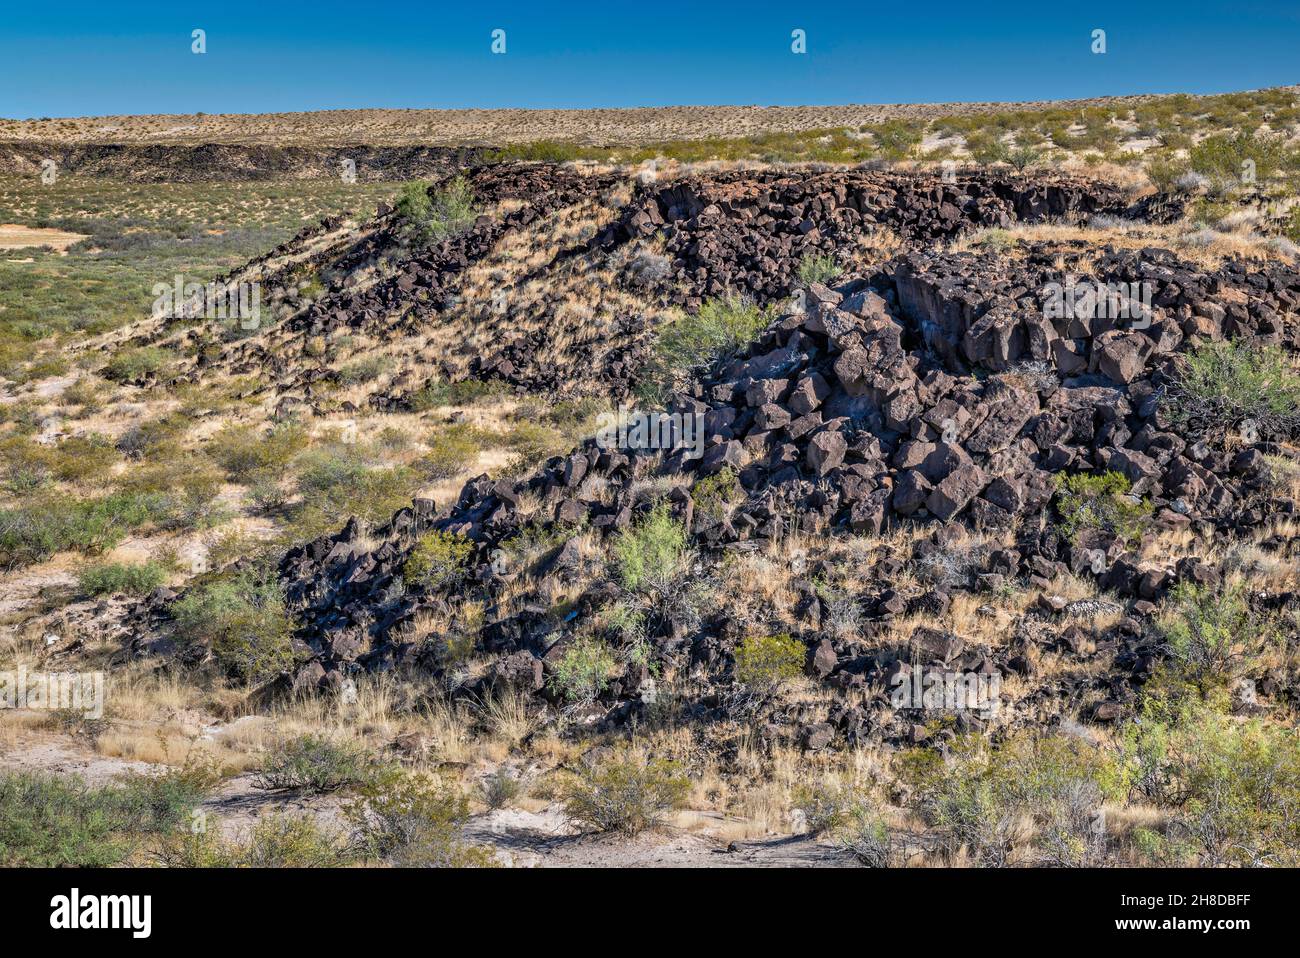 Volcanic rocks at Hunts Hole, maar crater, East Potrillo Mountains area, Organ Mountains Desert Peaks National Monument, New Mexico, USA Stock Photo